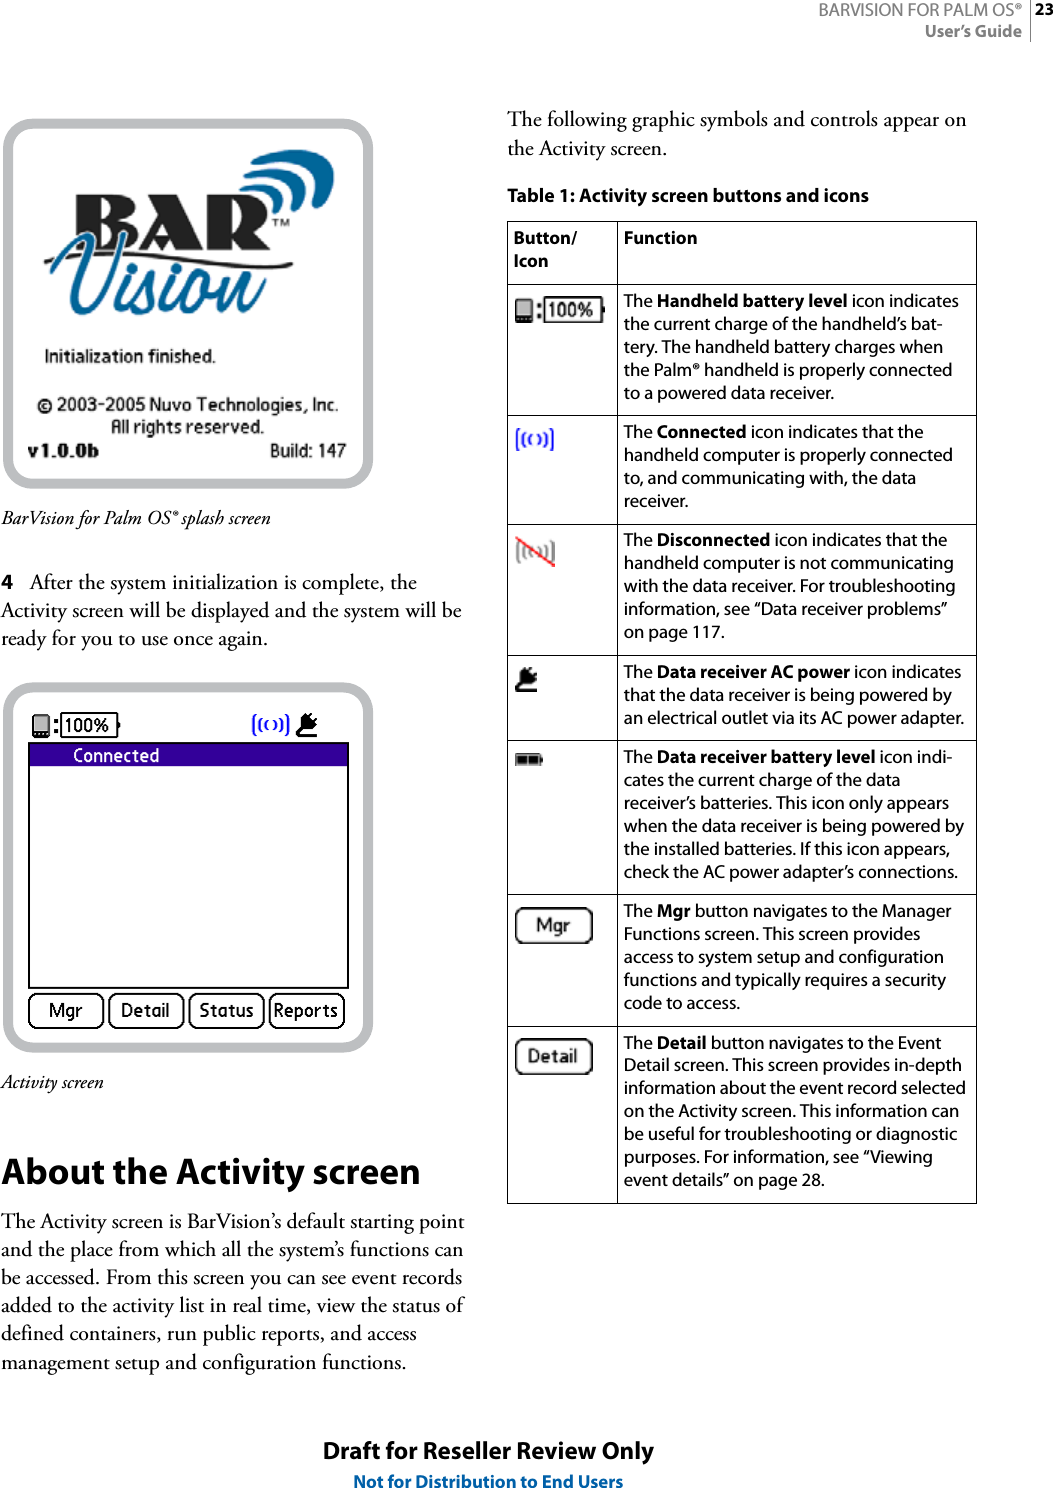 23BARVISION FOR PALM OS®User’s GuideDraft for Reseller Review OnlyNot for Distribution to End UsersBarVision for Palm OS® splash screen4After the system initialization is complete, the Activity screen will be displayed and the system will be ready for you to use once again.Activity screenAbout the Activity screenThe Activity screen is BarVision’s default starting point and the place from which all the system’s functions can be accessed. From this screen you can see event records added to the activity list in real time, view the status of defined containers, run public reports, and access management setup and configuration functions.The following graphic symbols and controls appear on the Activity screen.Table 1: Activity screen buttons and iconsButton/IconFunctionThe Handheld battery level icon indicates the current charge of the handheld’s bat-tery. The handheld battery charges when the Palm® handheld is properly connected to a powered data receiver.The Connected icon indicates that the handheld computer is properly connected to, and communicating with, the data receiver.The Disconnected icon indicates that the handheld computer is not communicating with the data receiver. For troubleshooting information, see “Data receiver problems” on page 117.The Data receiver AC power icon indicates that the data receiver is being powered by an electrical outlet via its AC power adapter.The Data receiver battery level icon indi-cates the current charge of the data receiver’s batteries. This icon only appears when the data receiver is being powered by the installed batteries. If this icon appears, check the AC power adapter’s connections.The Mgr button navigates to the Manager Functions screen. This screen provides access to system setup and configuration functions and typically requires a security code to access.The Detail button navigates to the Event Detail screen. This screen provides in-depth information about the event record selected on the Activity screen. This information can be useful for troubleshooting or diagnostic purposes. For information, see “Viewing event details” on page 28.